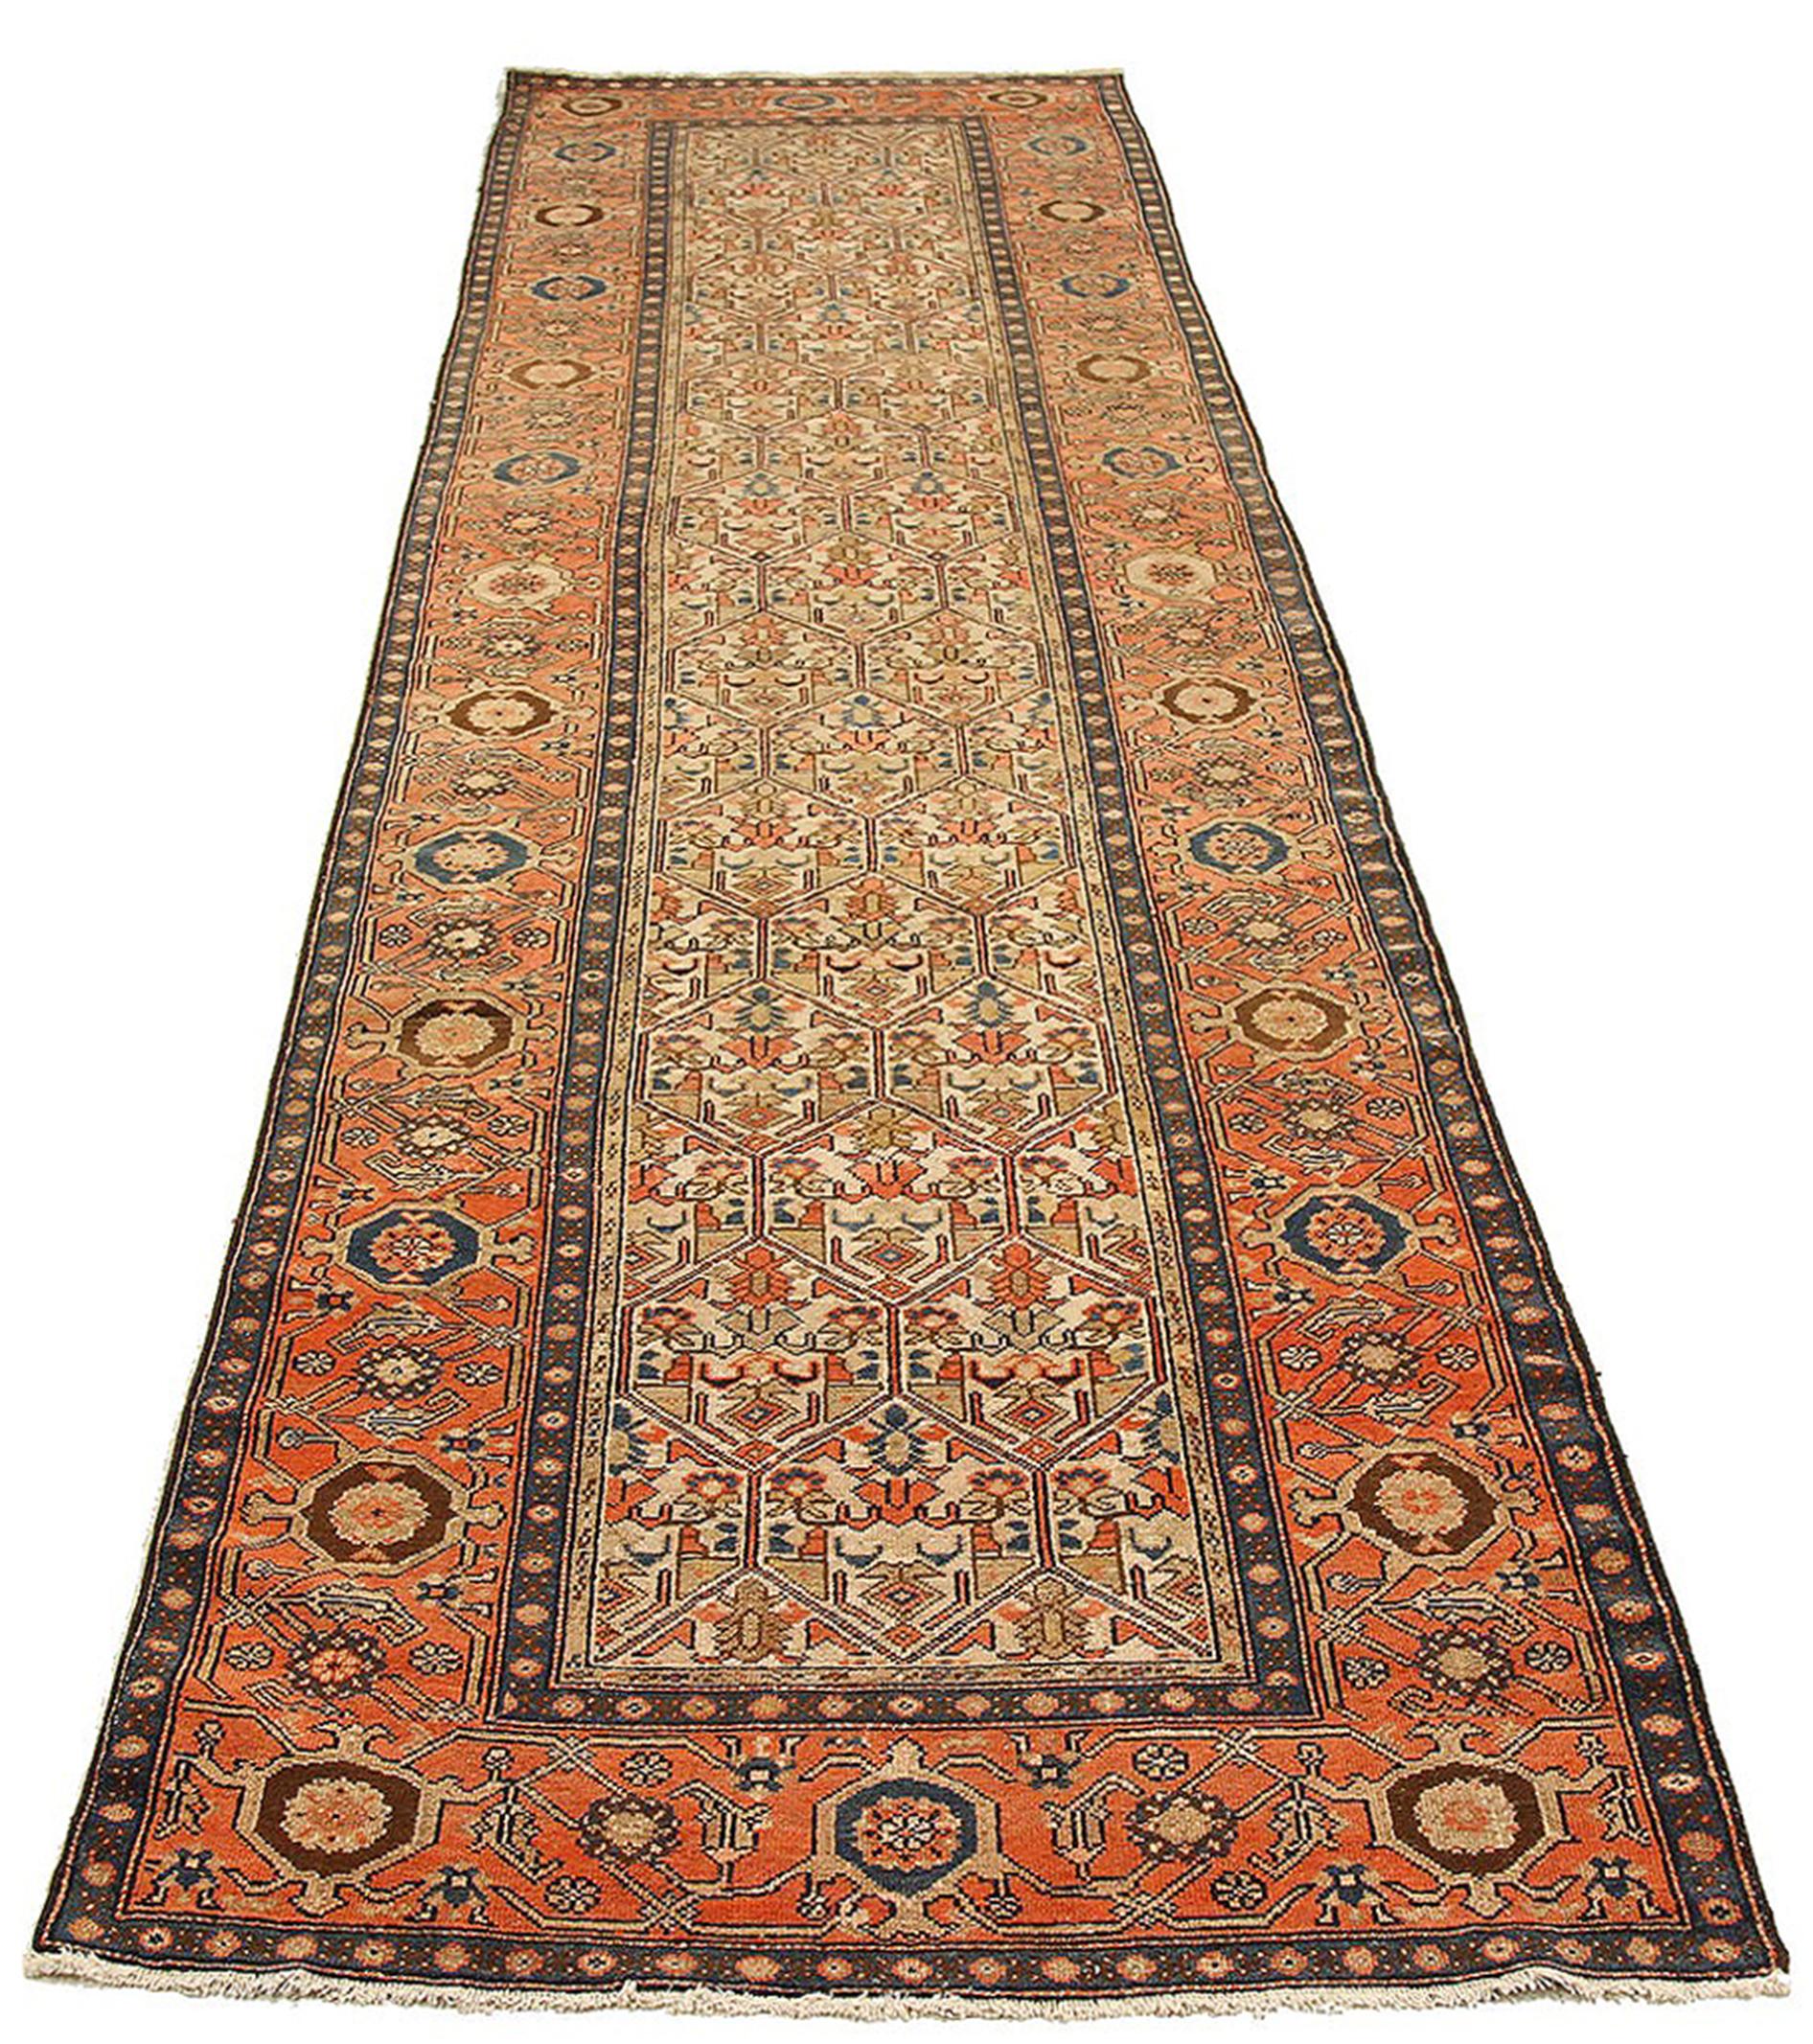 Antique Persian rug handwoven from the finest sheep’s wool and colored with all-natural vegetable dyes that are safe for humans and pets. It’s a traditional Malayer design featuring blue, orange and beige flower details over an ivory field. It’s a